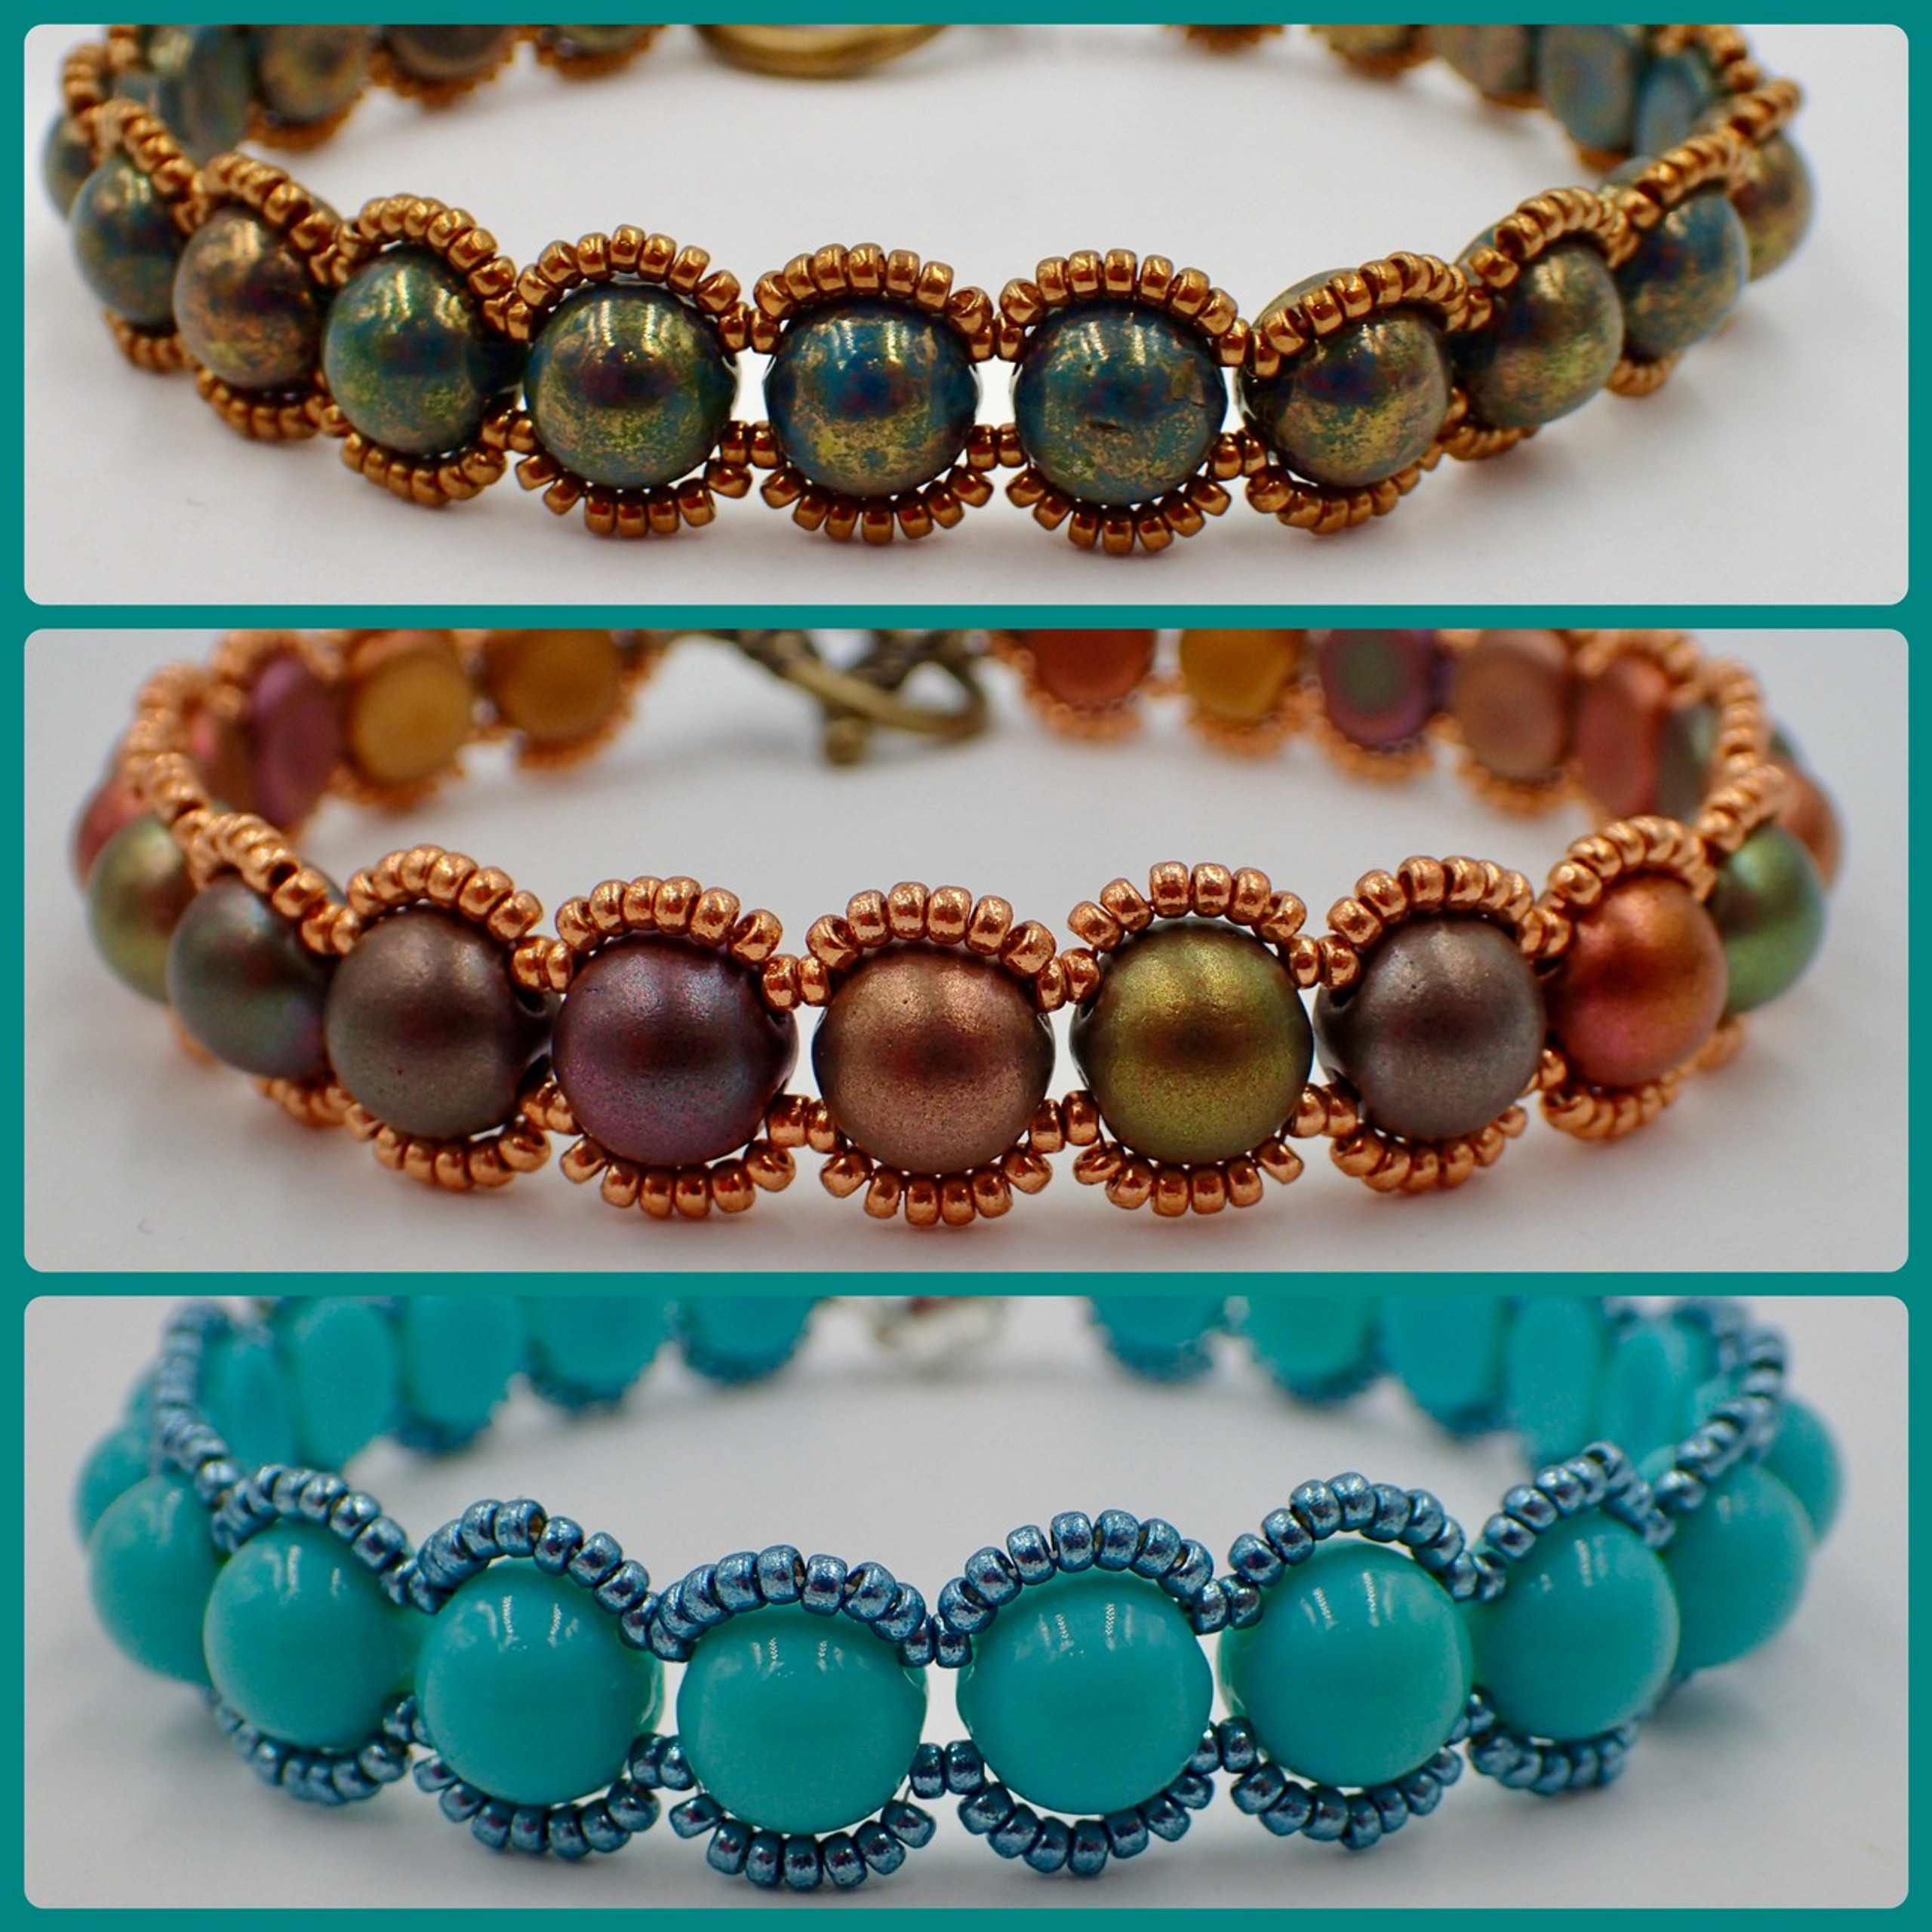 Bauble Bracelet Instant Download PDF Pattern - Off the Beaded Path